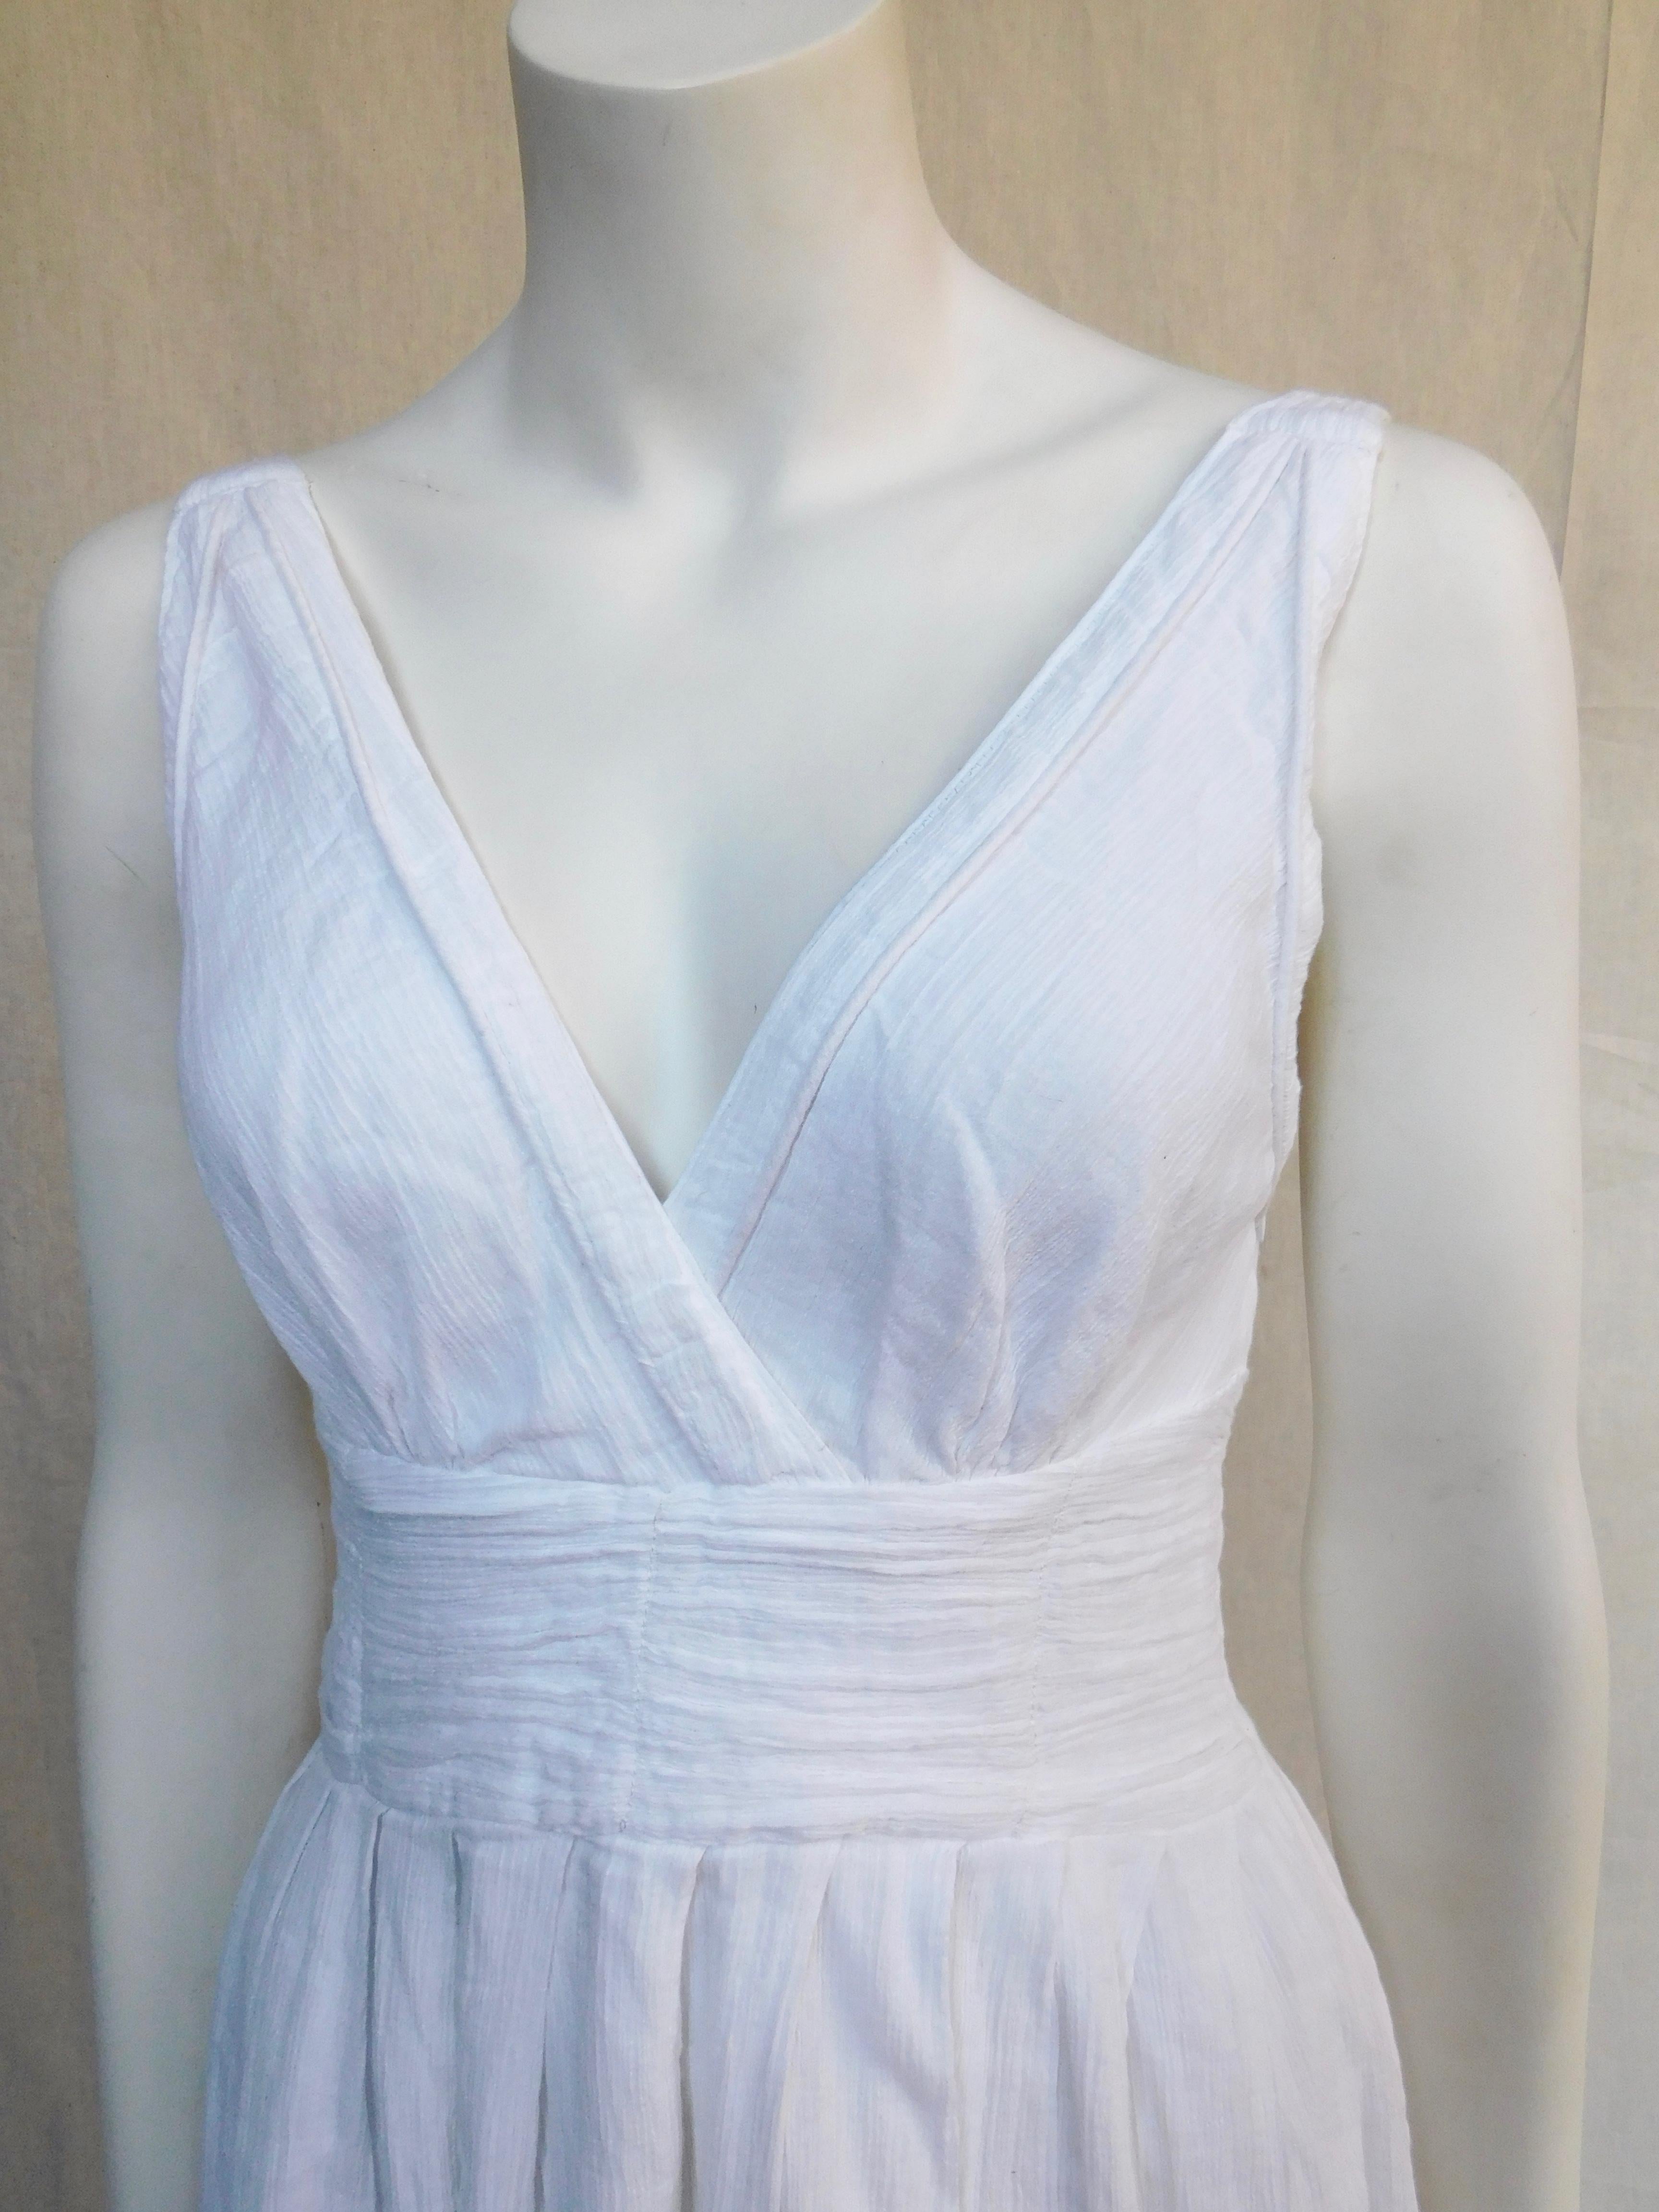  Marc Jacobs gauzy white cotton dress in a simple but sexy Greek goddess style.
The perfect vacation dress!